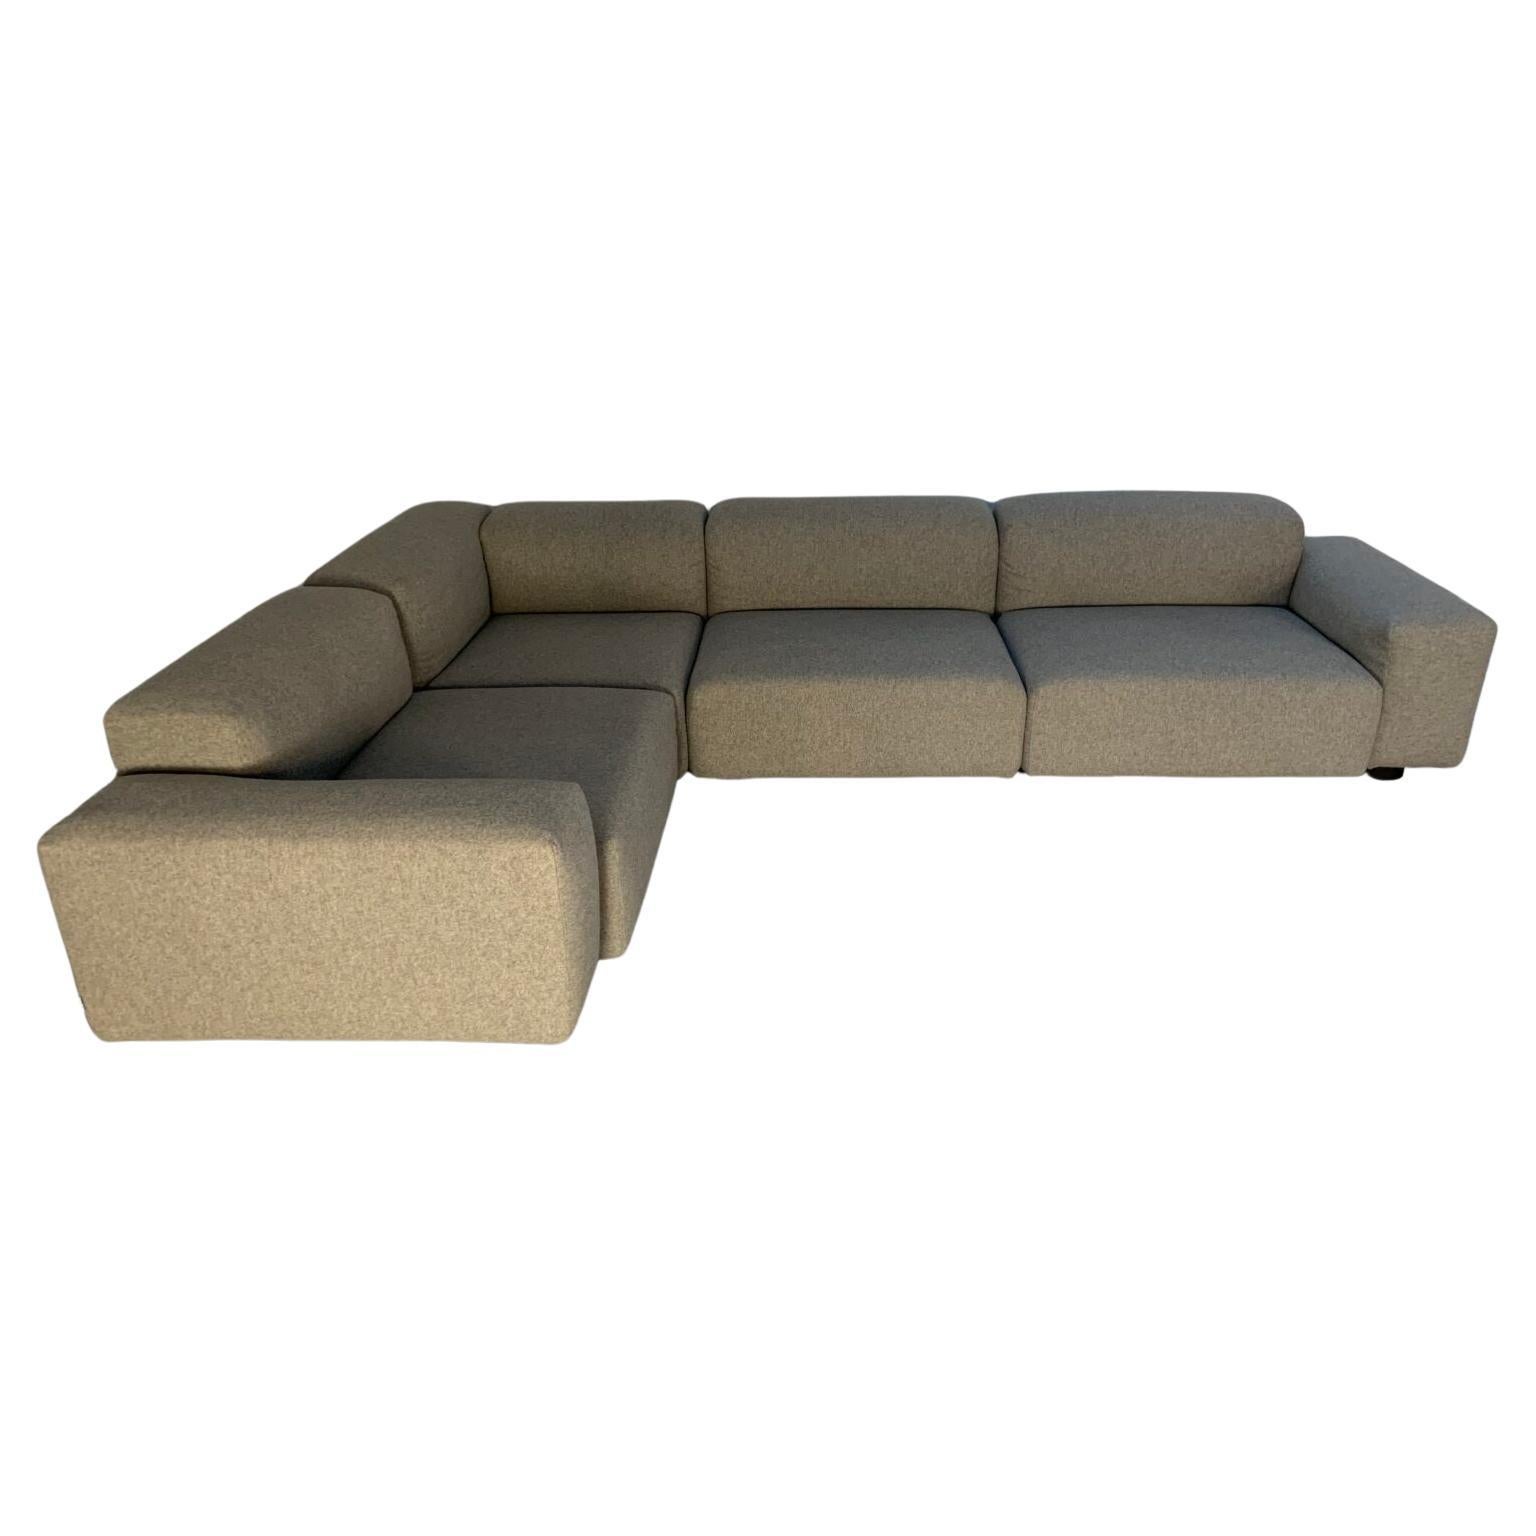 Vitra "Place" L-Shape Sofa - In "Cosy" Grey Wool For Sale